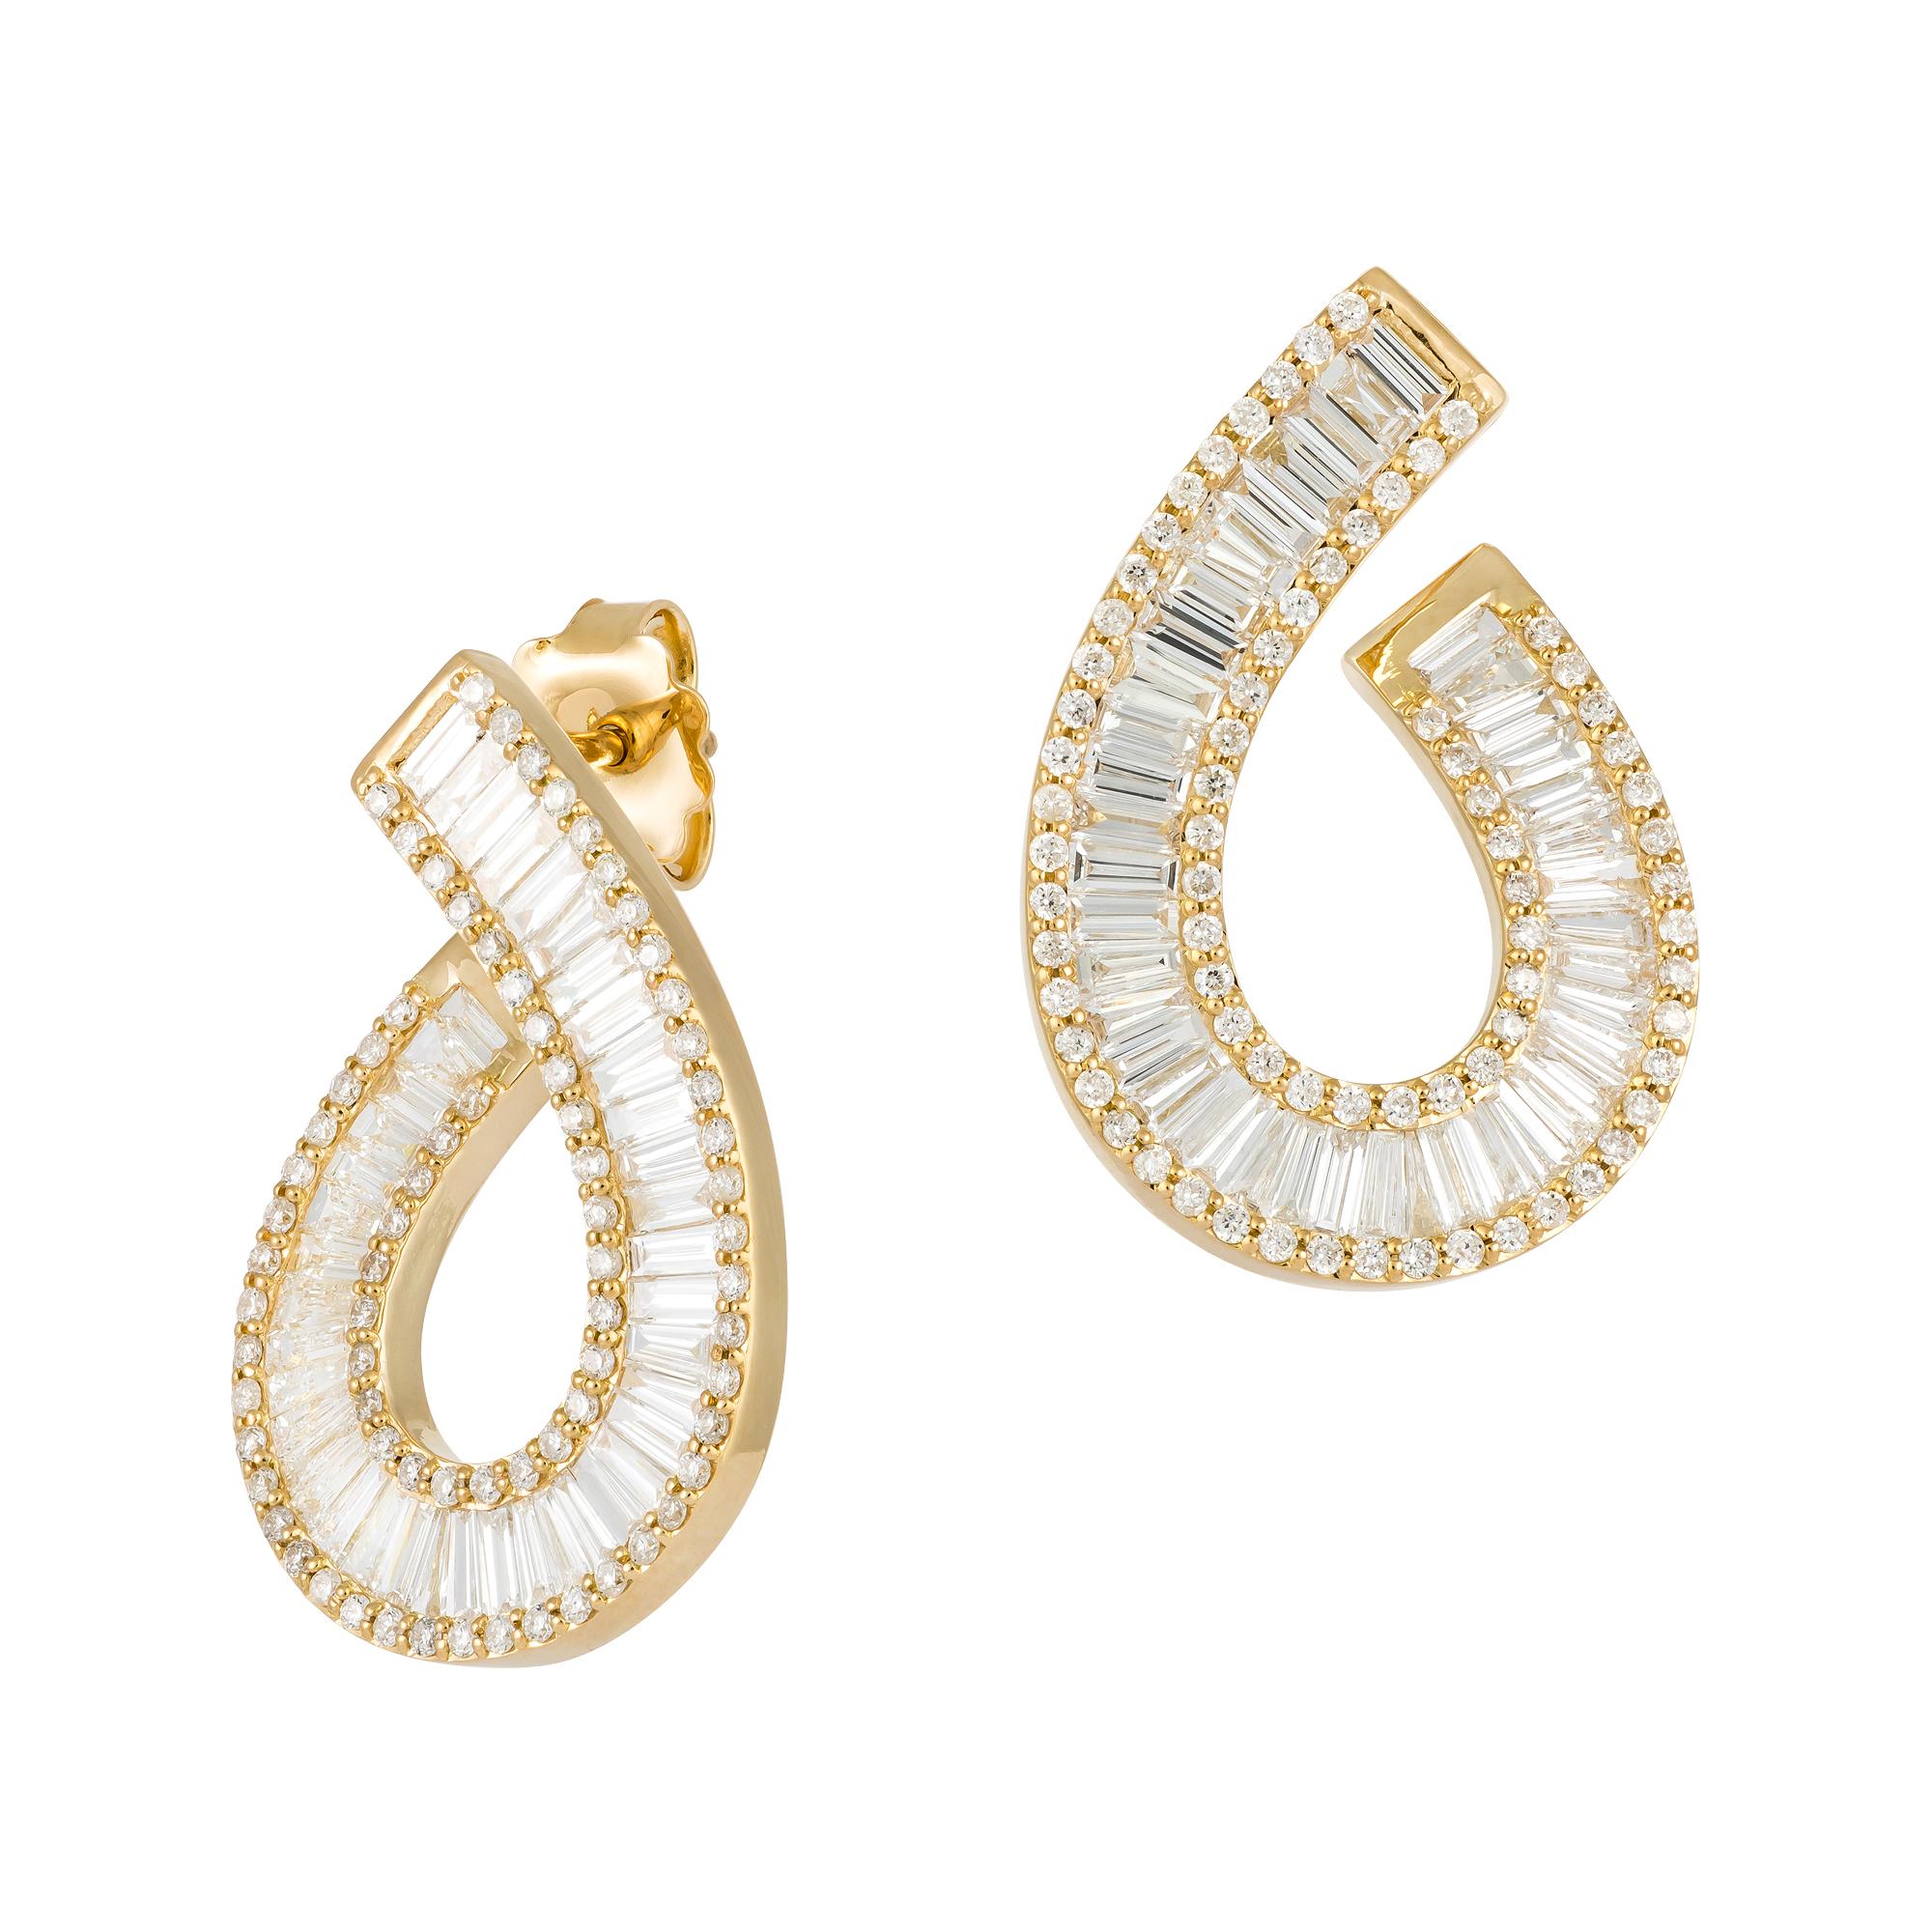 EARRING 18K Yellow Gold Diamond 0.55 Cts/146 Pcs Tapered Baguette 1.75 Cts/81 Pcs